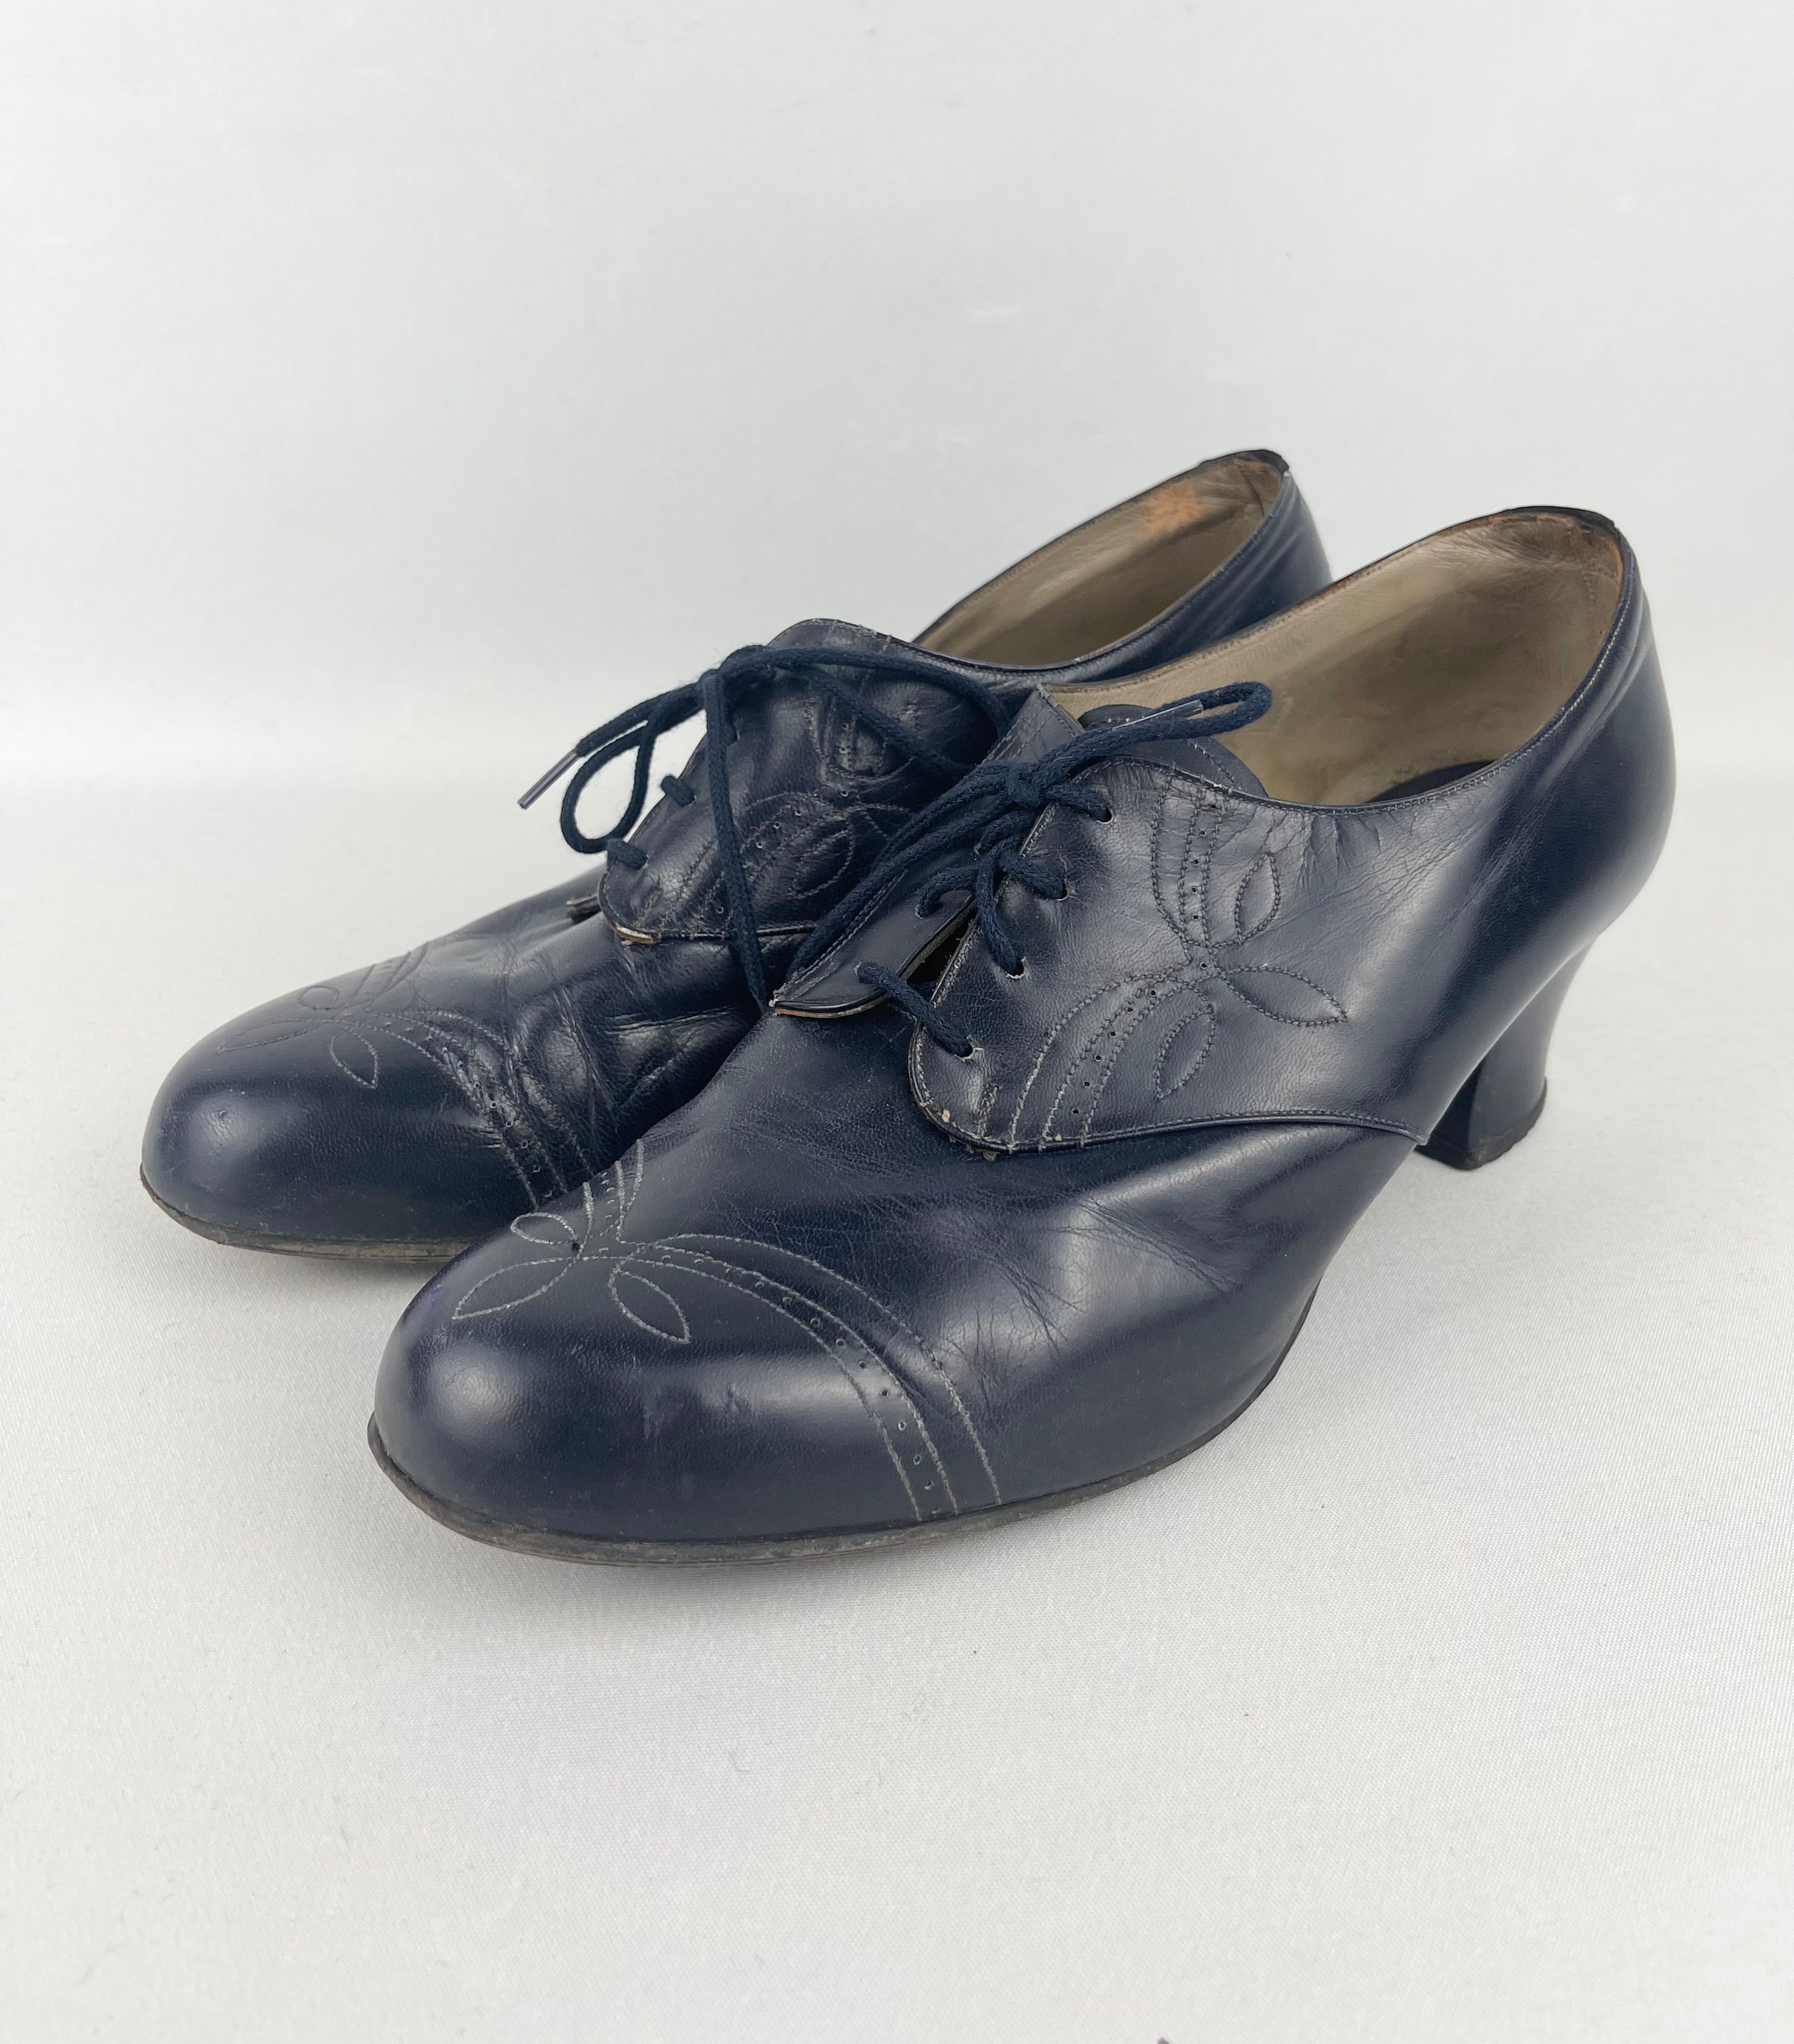 Original 1940's Wide Fitting Blue Leather Lace Up Walking Shoes by Portland  - UK 5 or 5.5